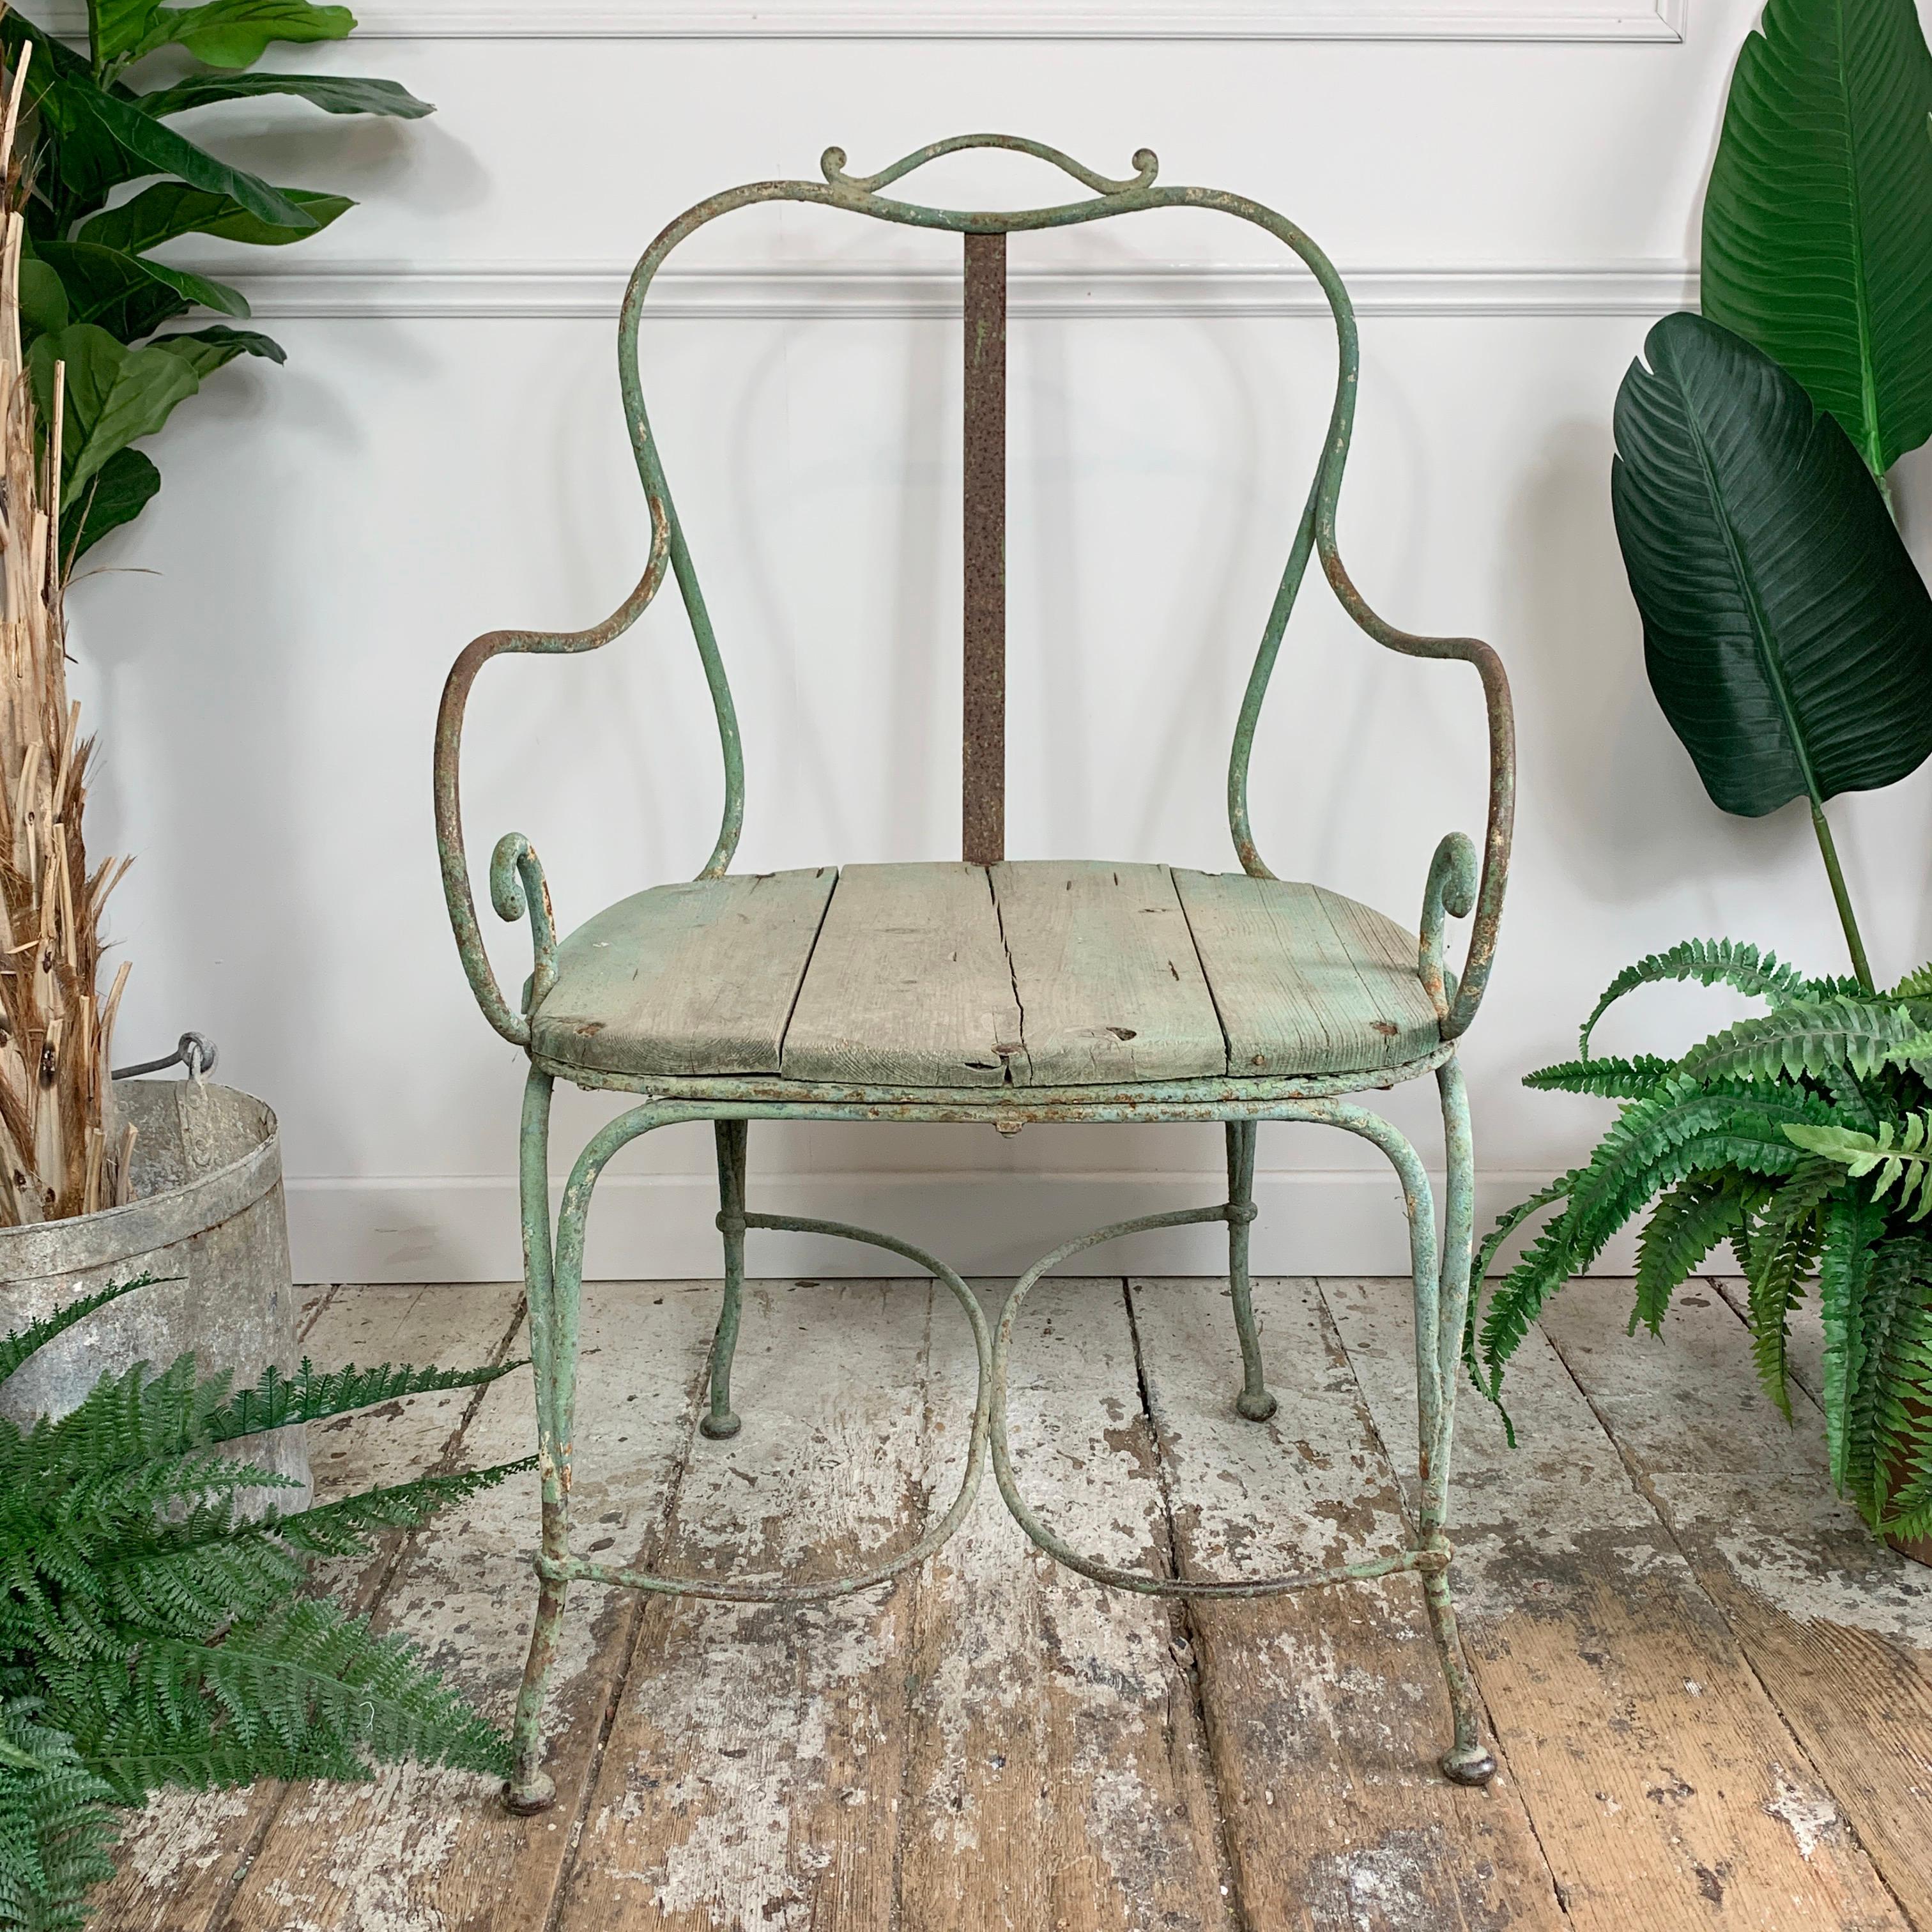 18th century French Régence estate made ironwork Chateau arm chair of great proportions, blacksmith hammered weld scroll arms and French cabriole legs, the wooden seat, a likely 19th century replacement is in very good order. Traces of the original